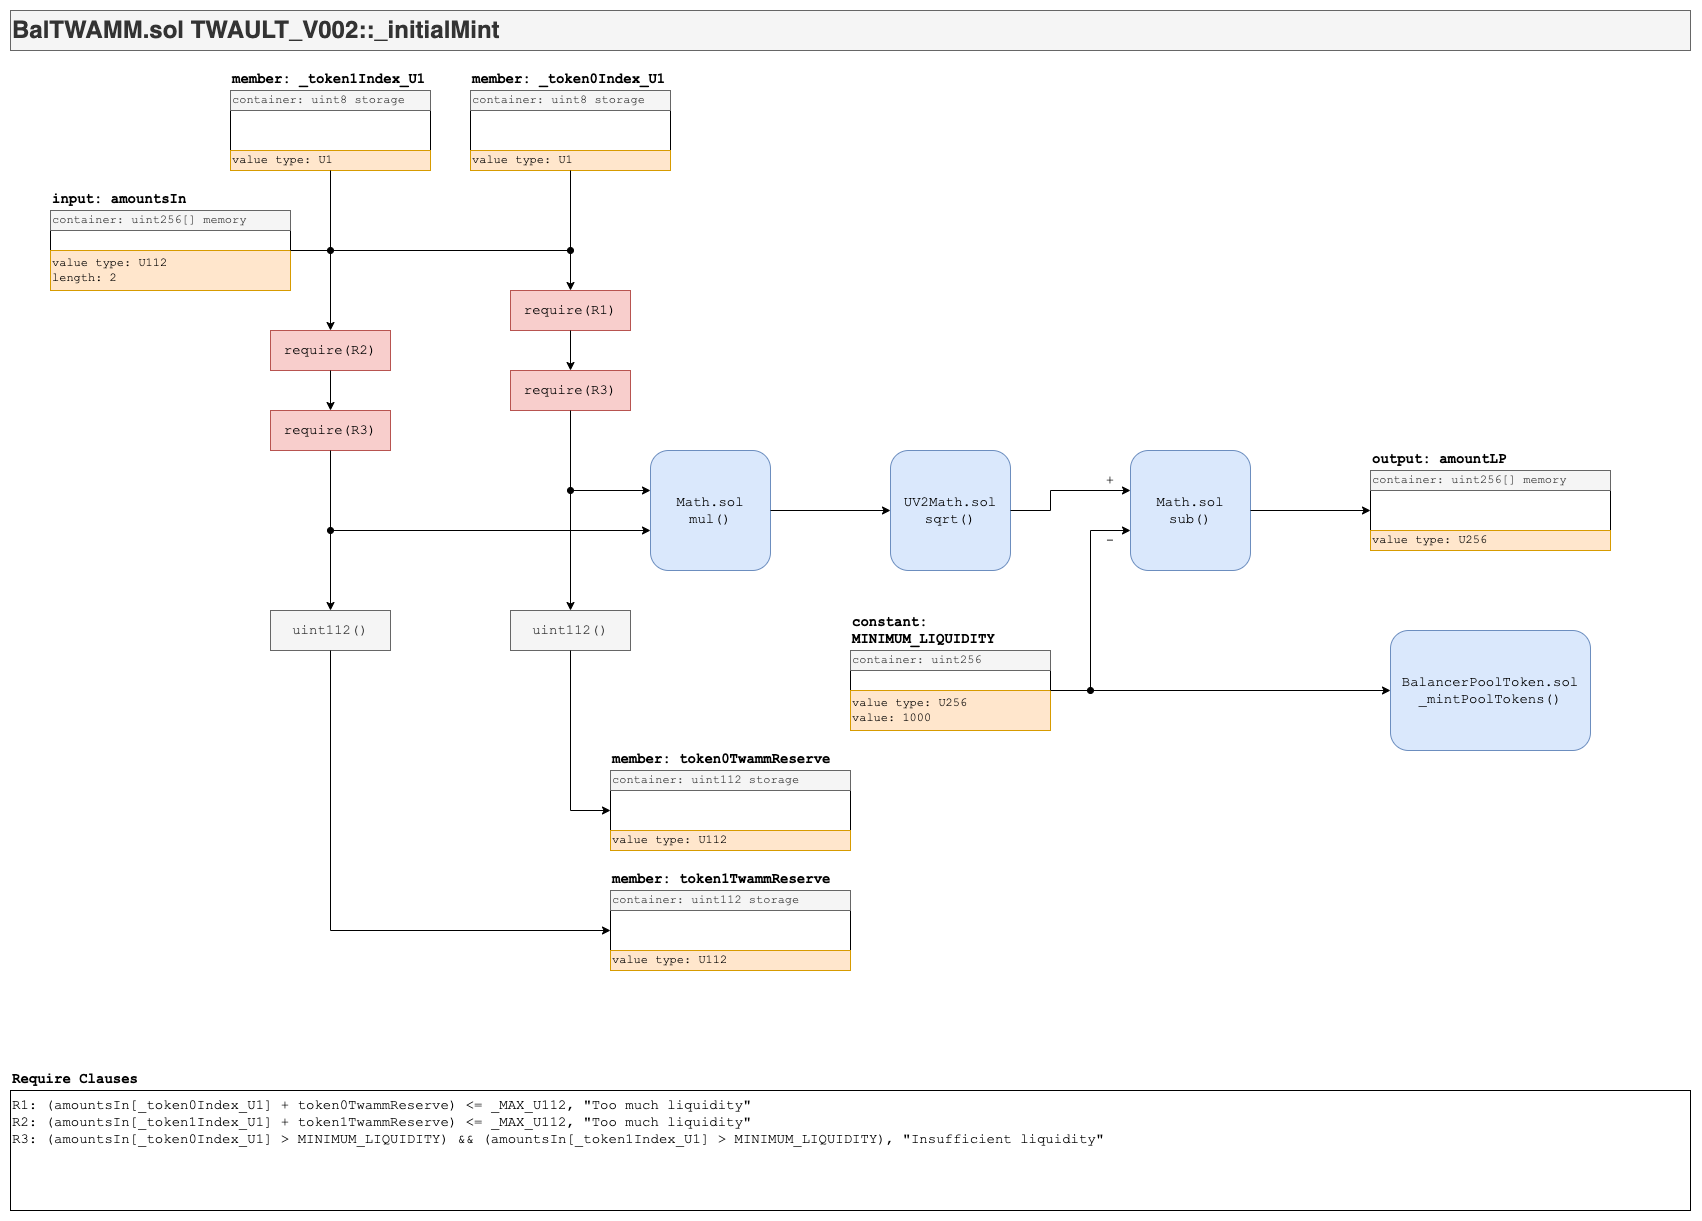 Flow diagram for initialMint with dependencies, data structures, and assertions